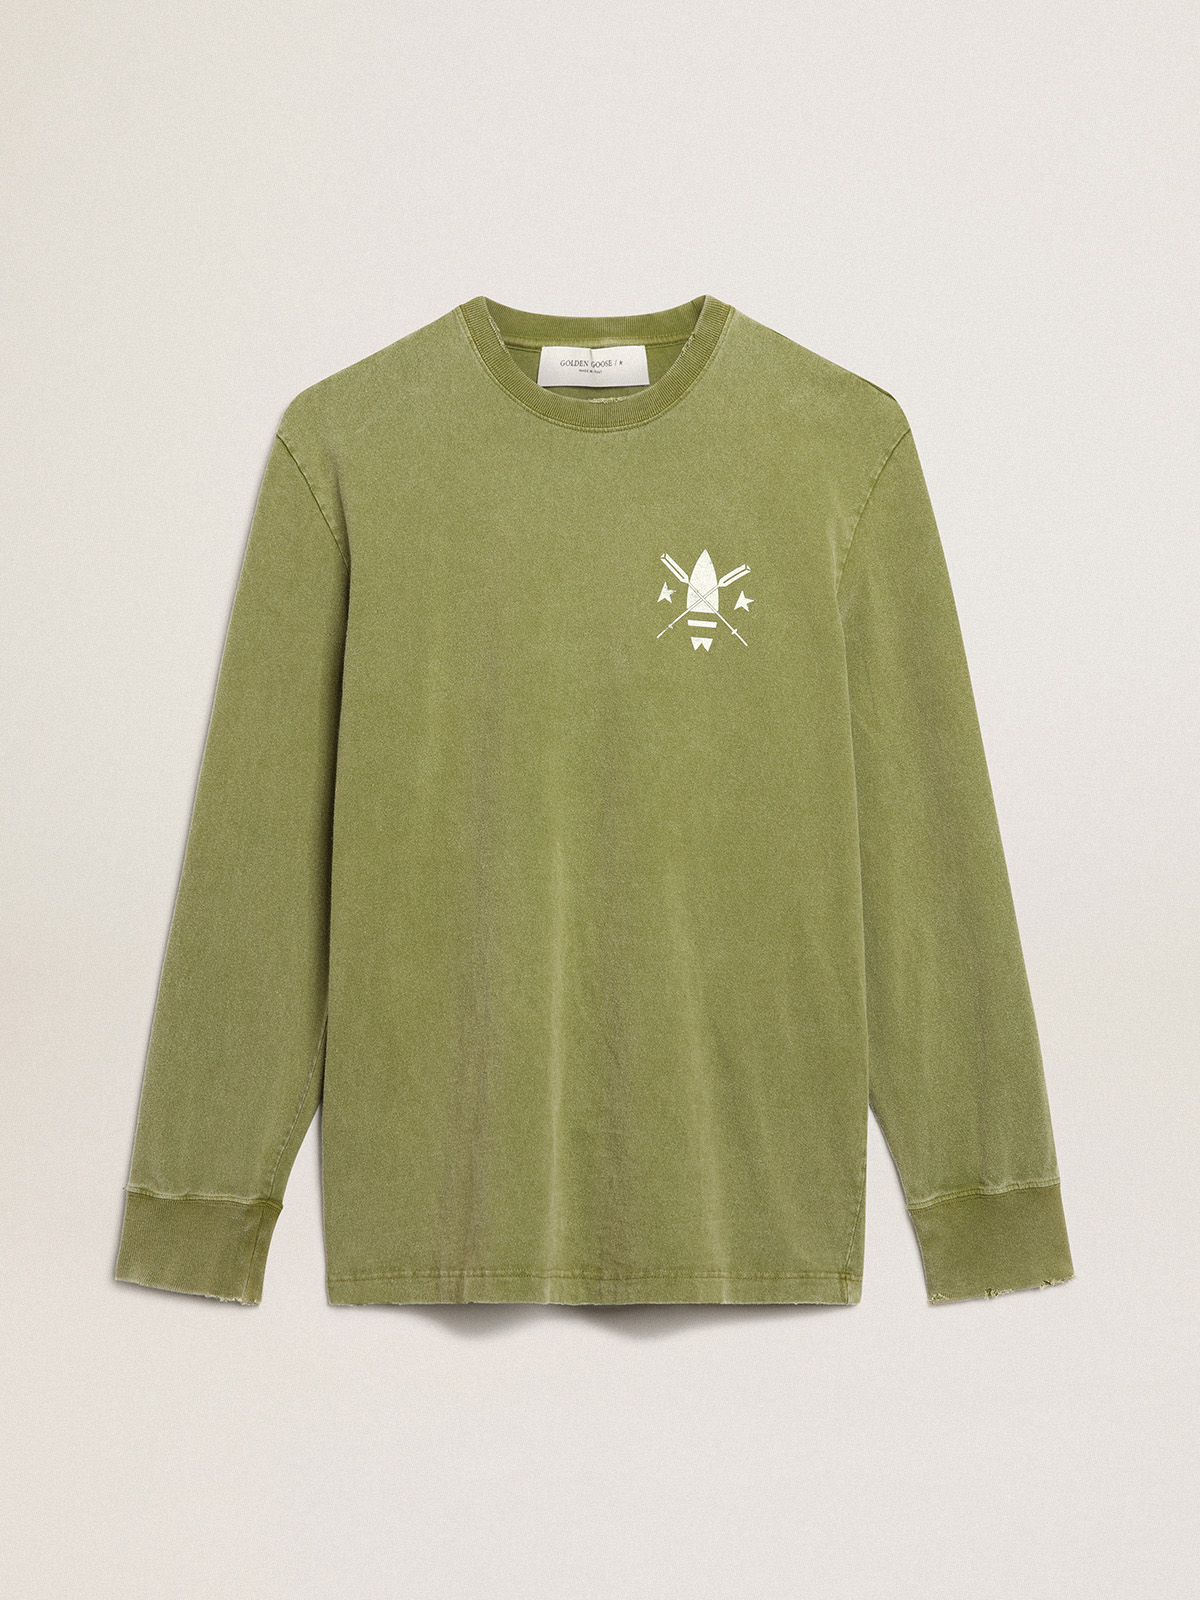 Pesto-green T-shirt with white logo on the front and back | Golden Goose